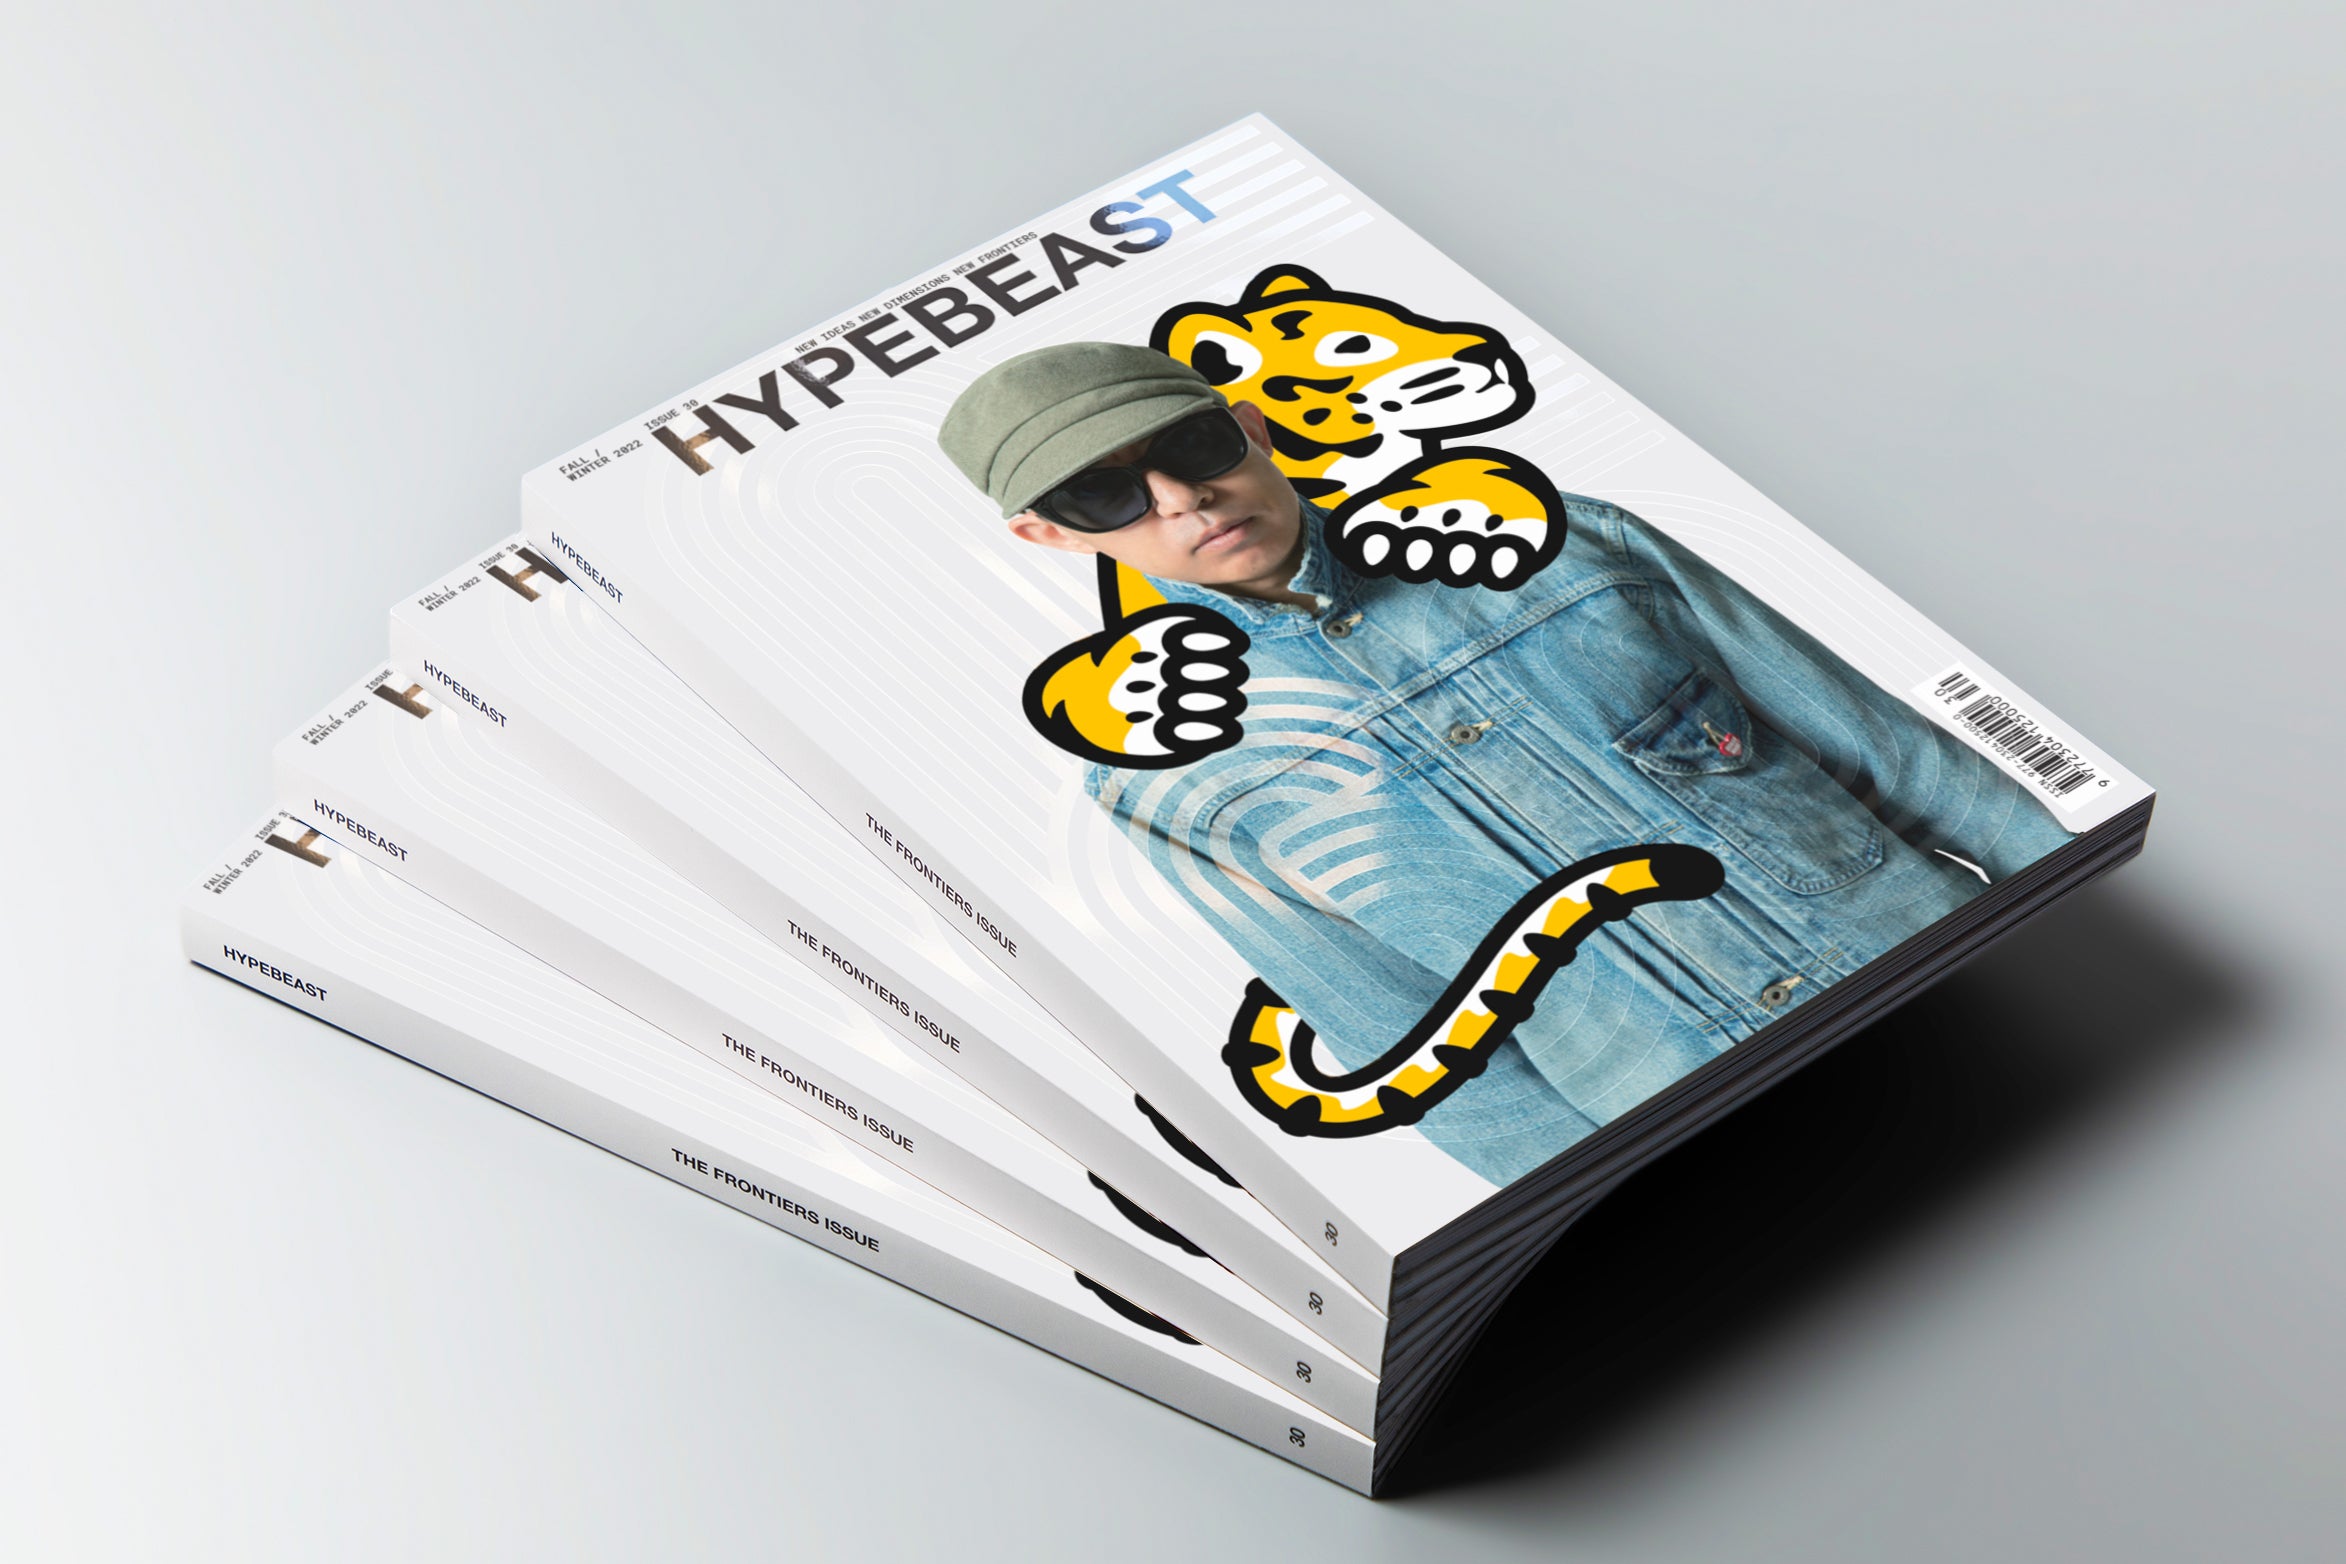 hypebeast-magazine-issue-30-the-frontiers-issue-02